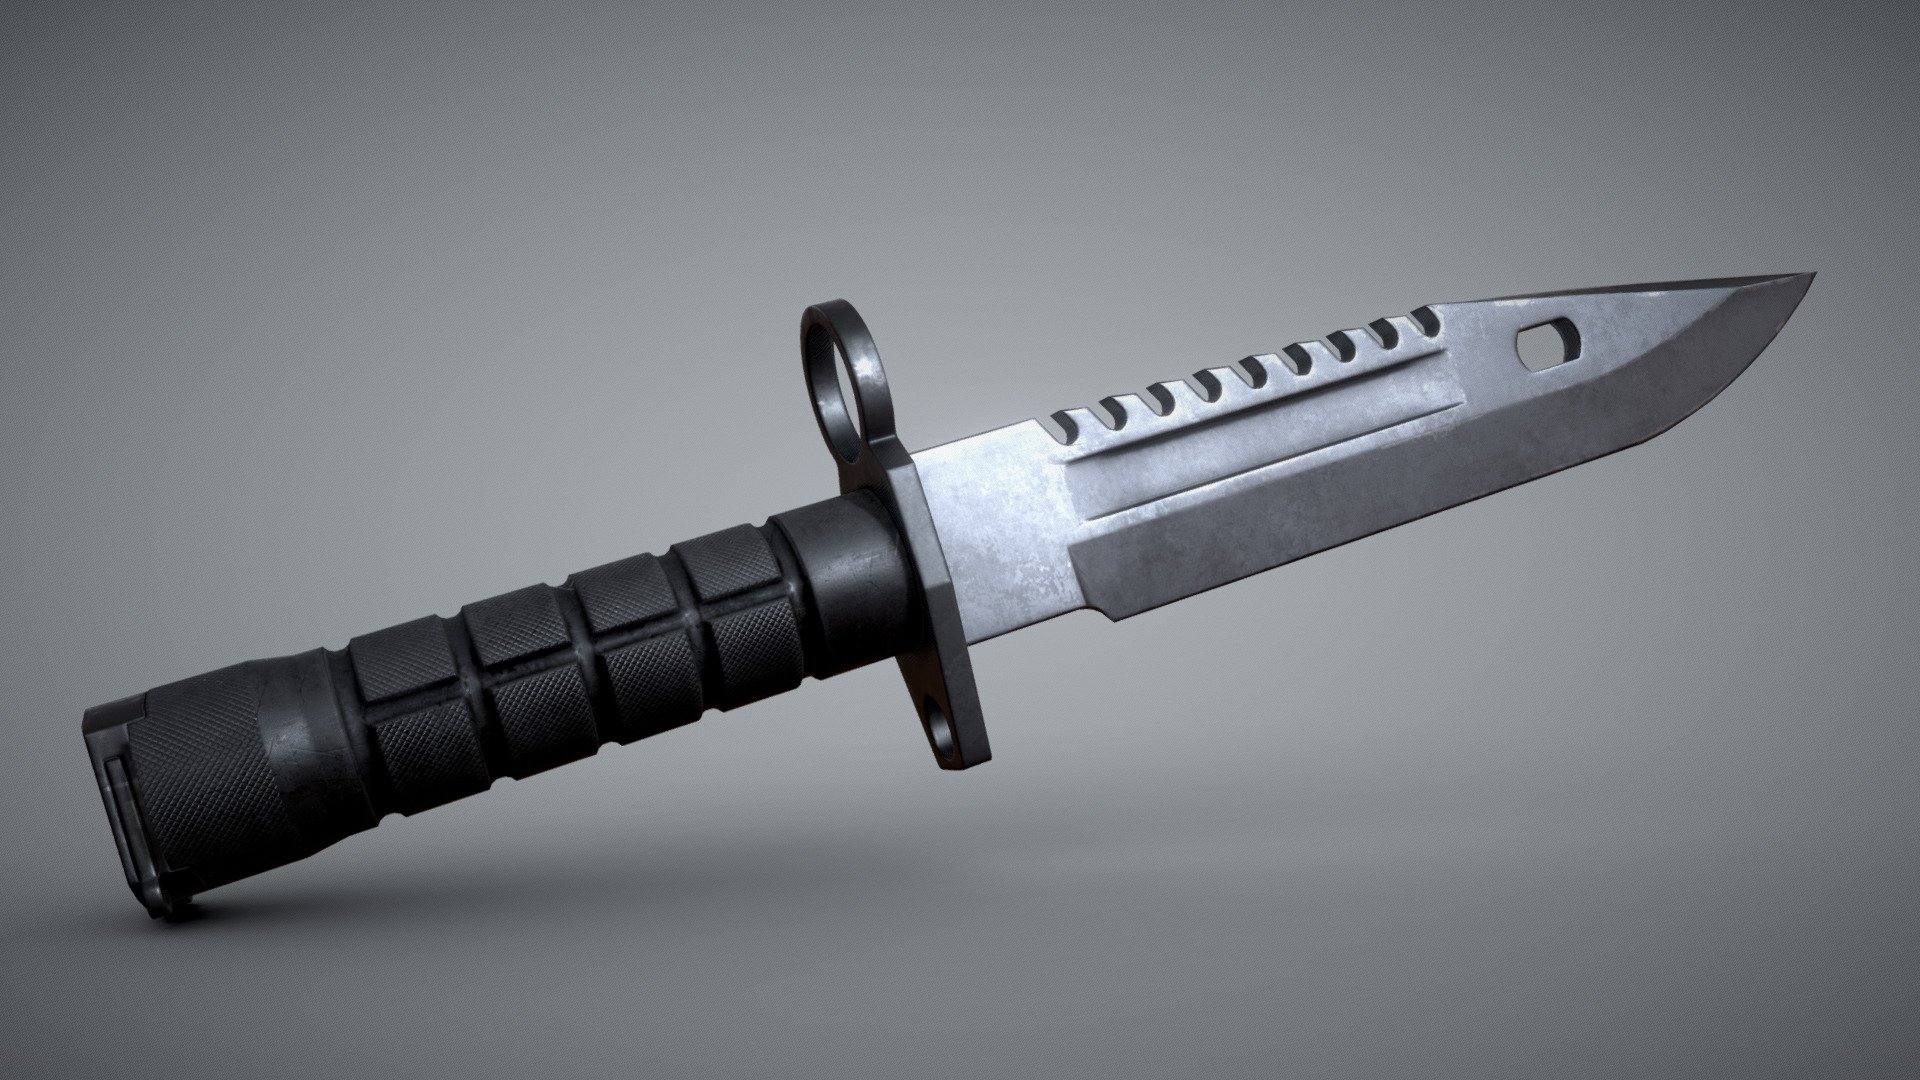 M9 Bayonet Tactical Knife Aaa Game Ready Asset Buy Royalty Free 3d